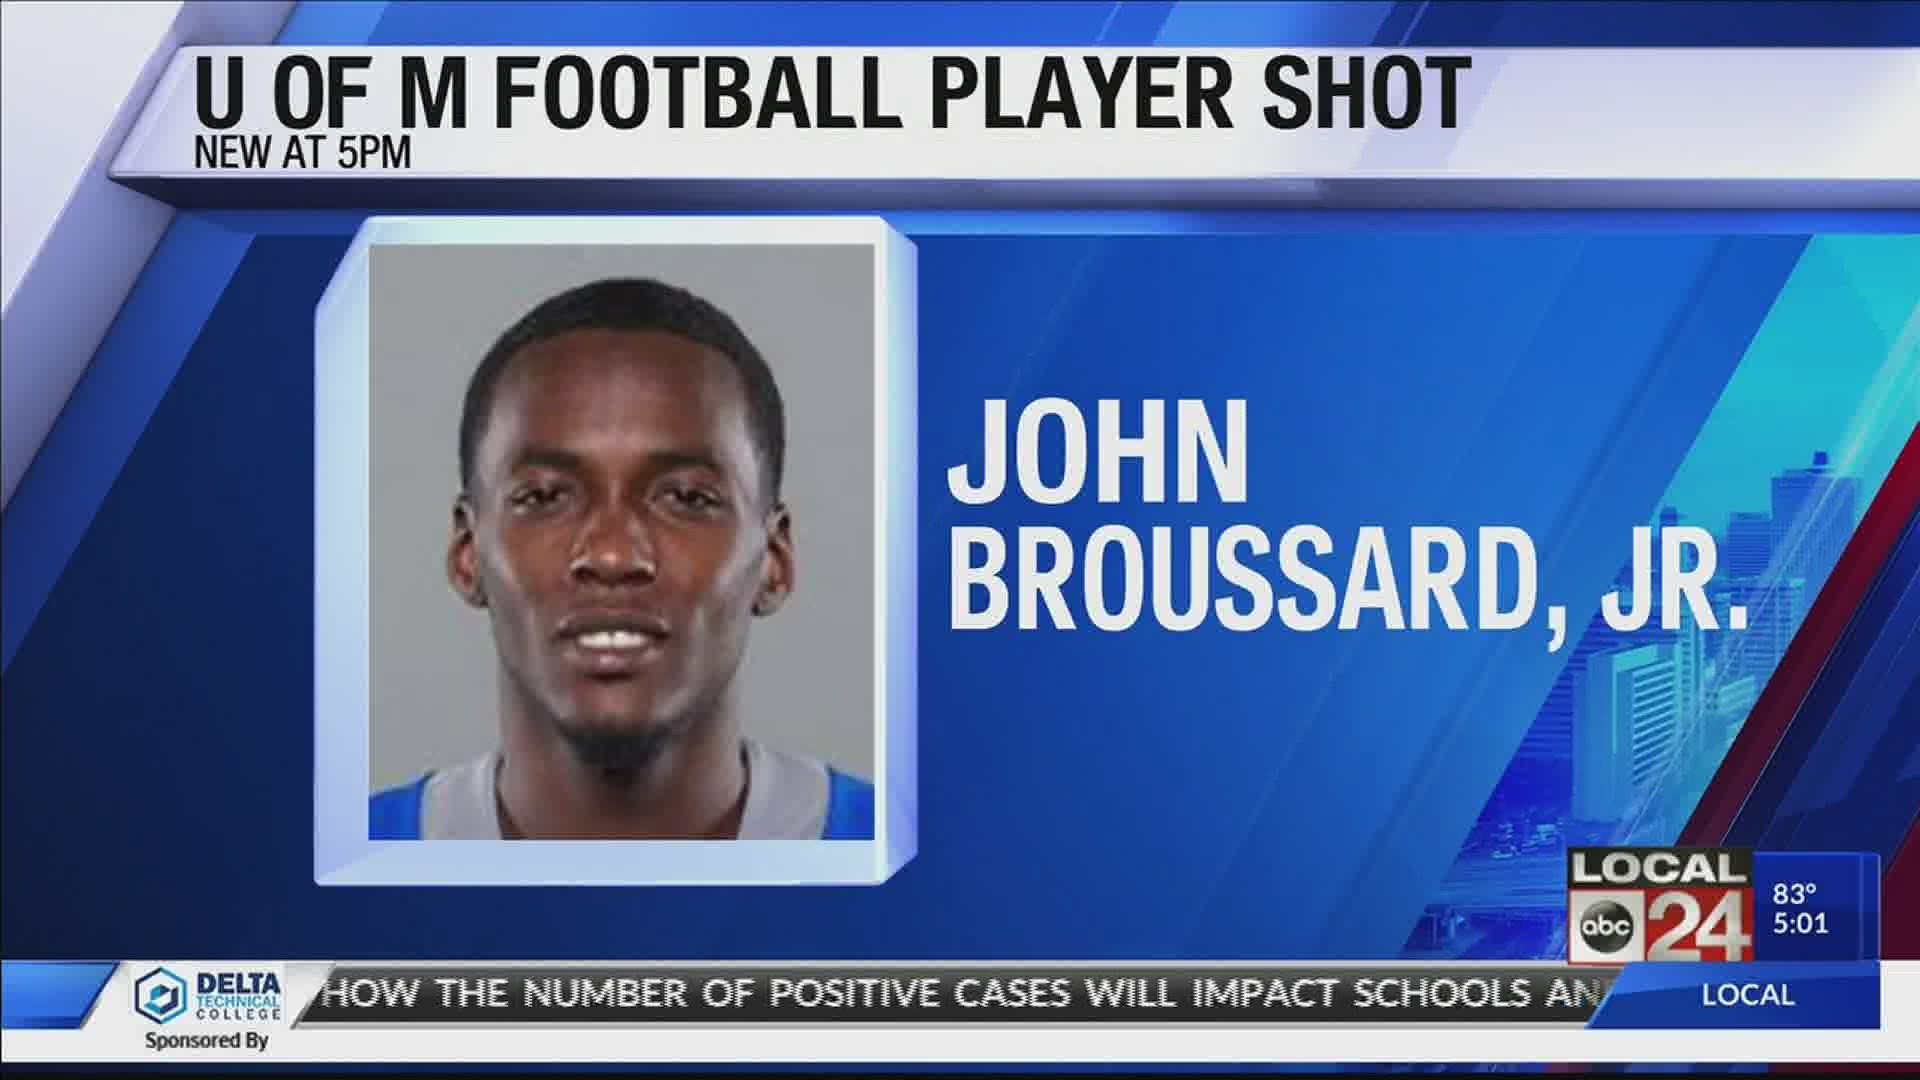 According to the Memphis Police Department, senior defensive back John Broussard Jr. was shot in the leg Sunday night near the U of M.